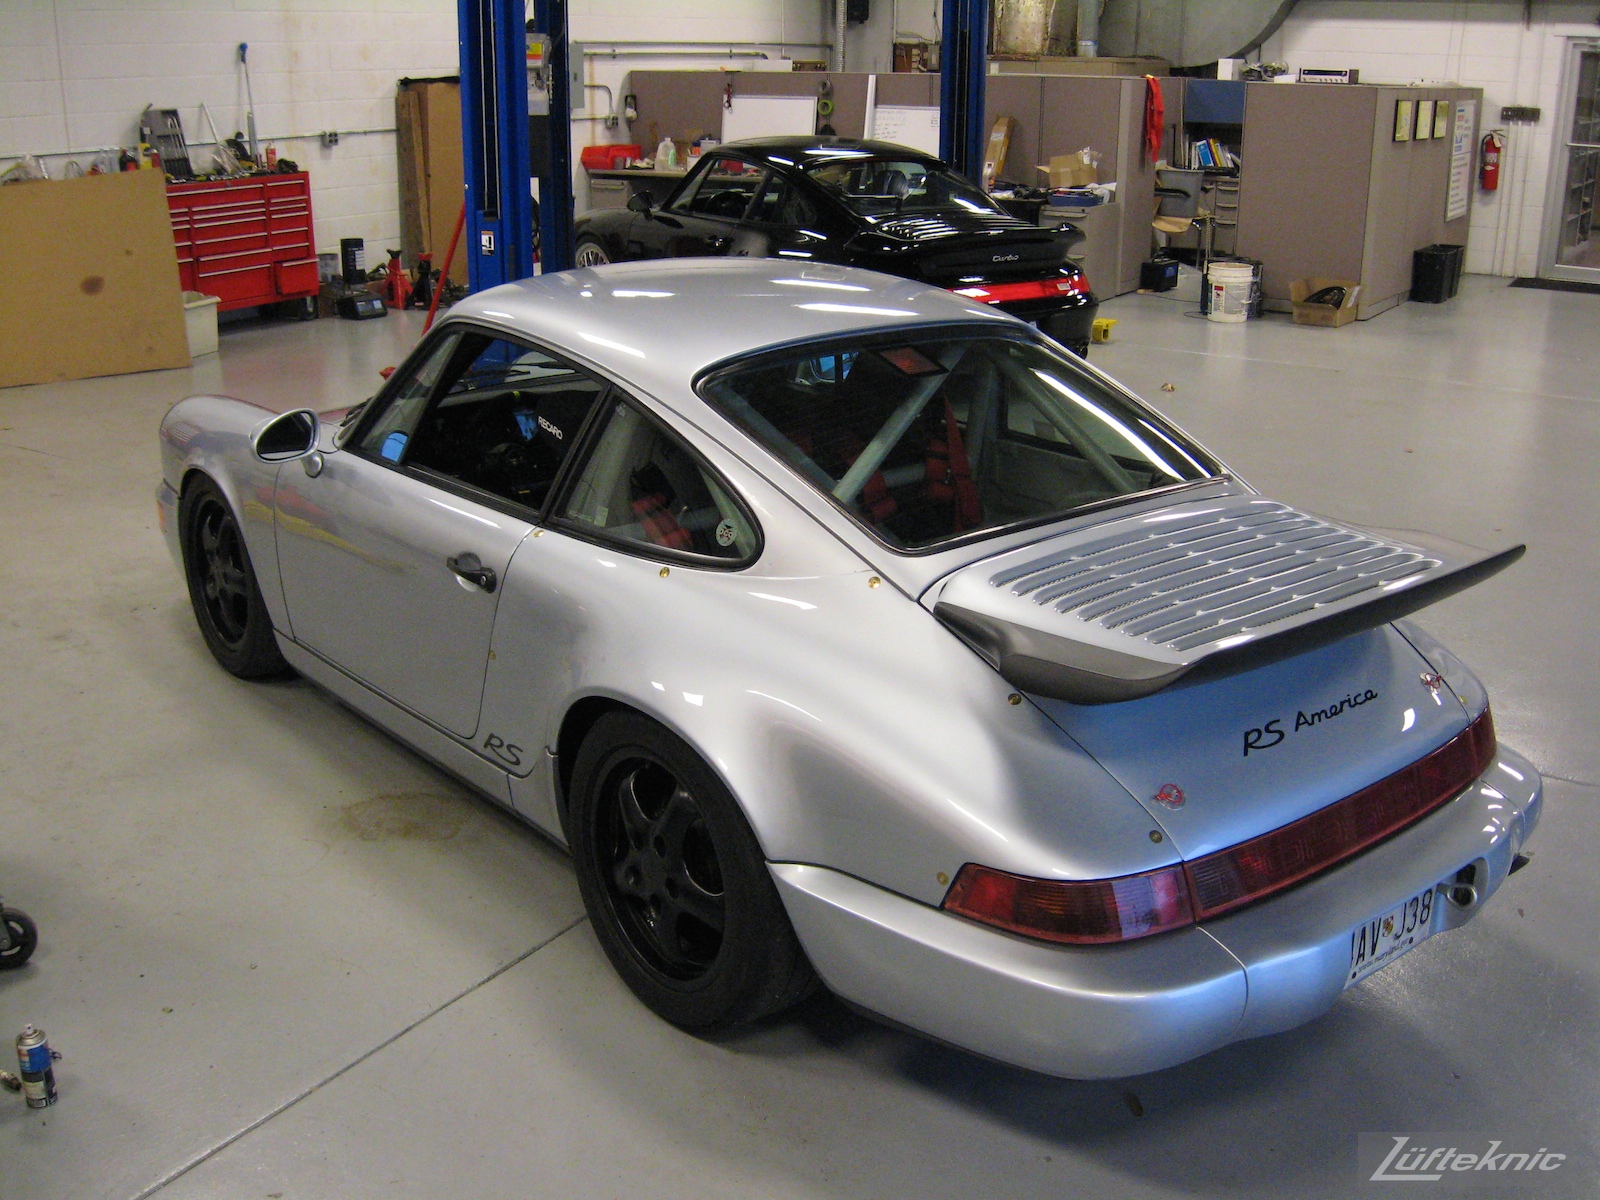 The completed 964 RS America project sitting in the Lüfteknic shop.